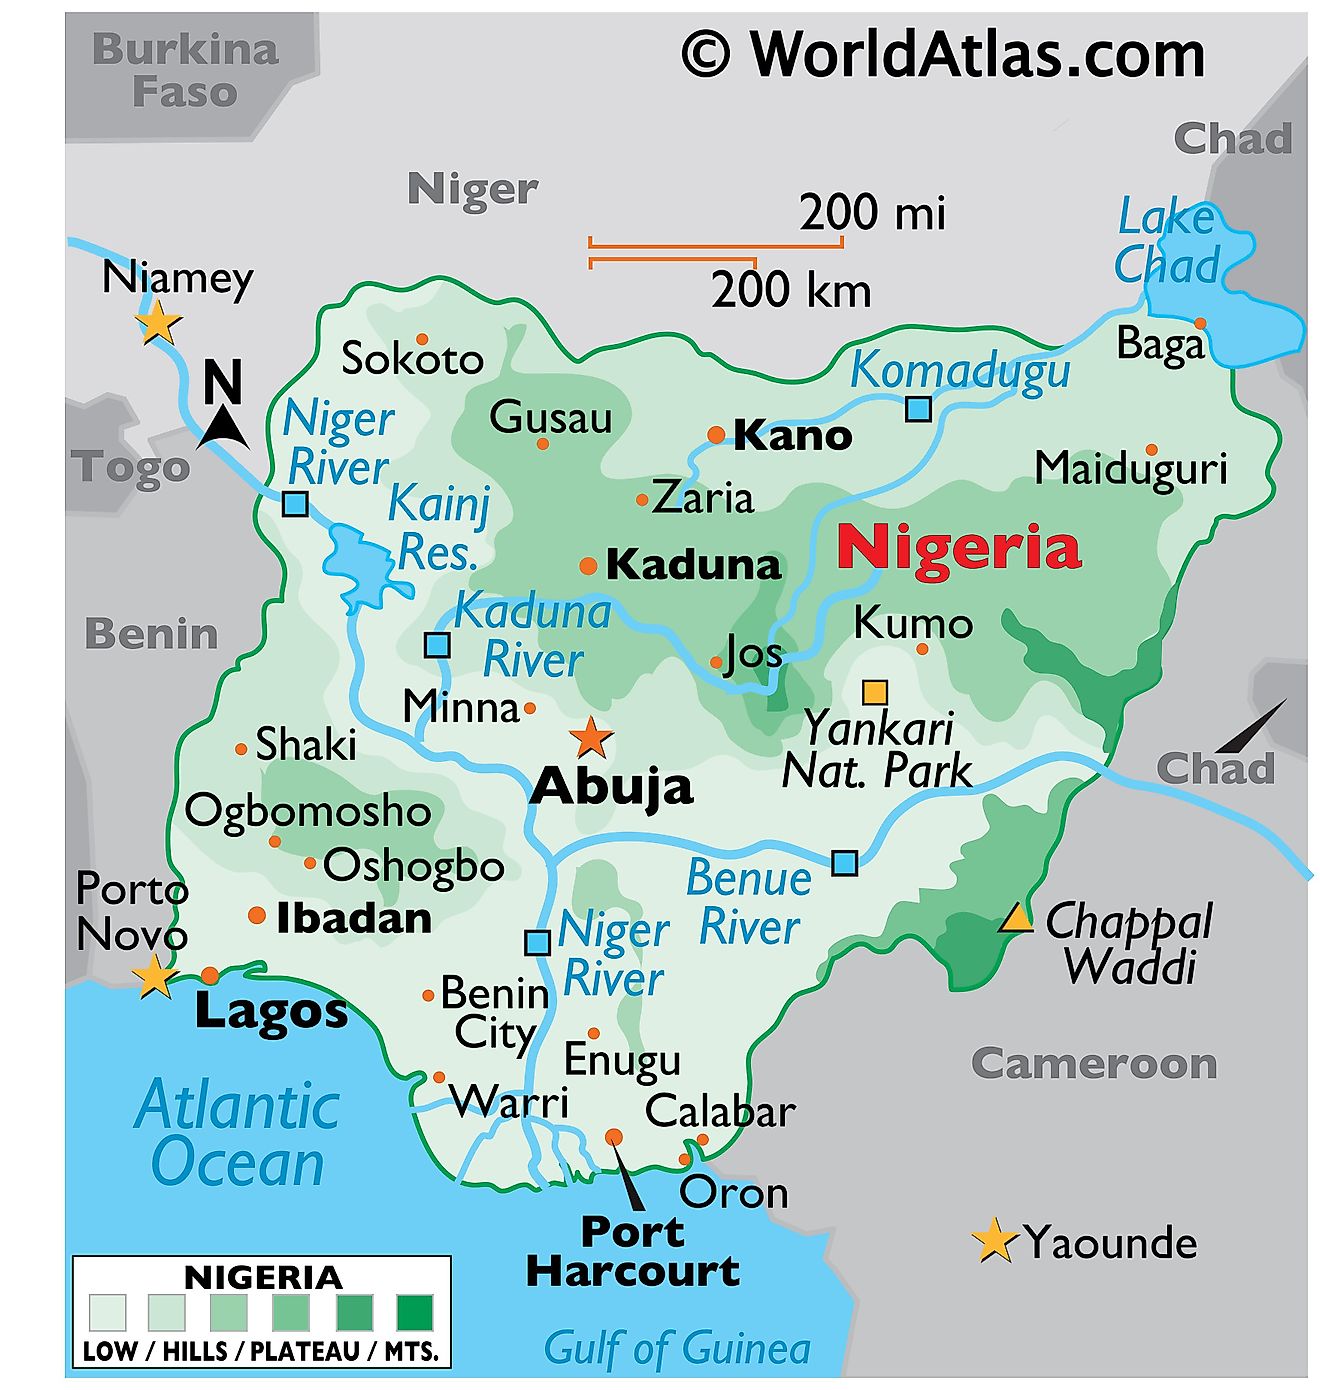 Physical Map of Nigeria with state boundaries. The map shows physical features like relief, highest peak, major rivers, lakes, major cities, etc.